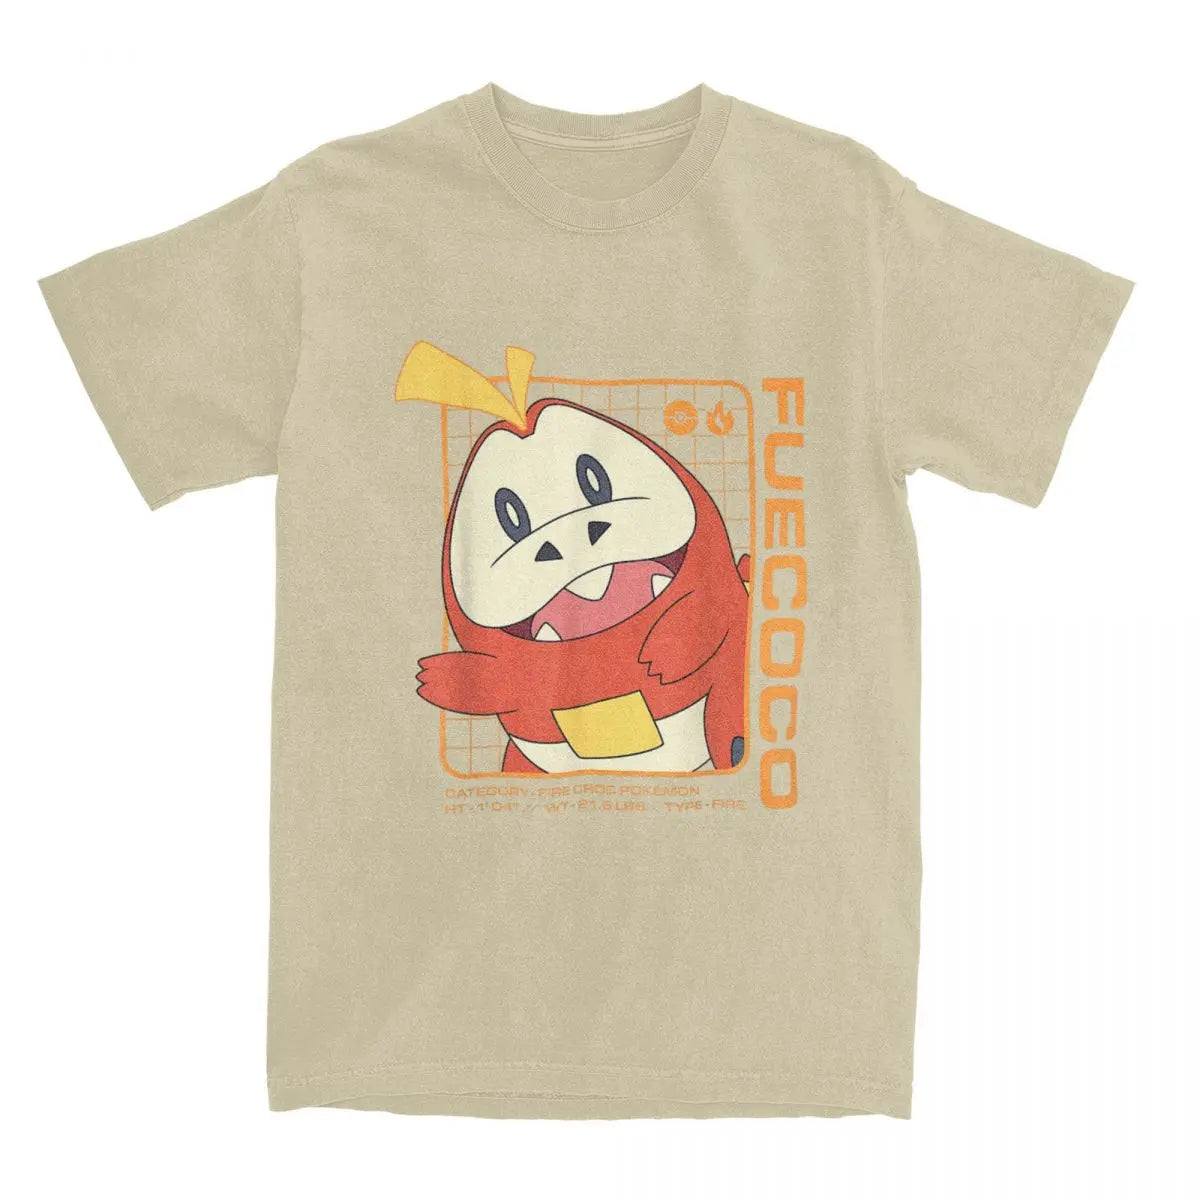 Catch e all with our new Ember Fuecoco Classic Tee | Here at Everythinganimee we have the worlds best anime merch | Free Global Shipping